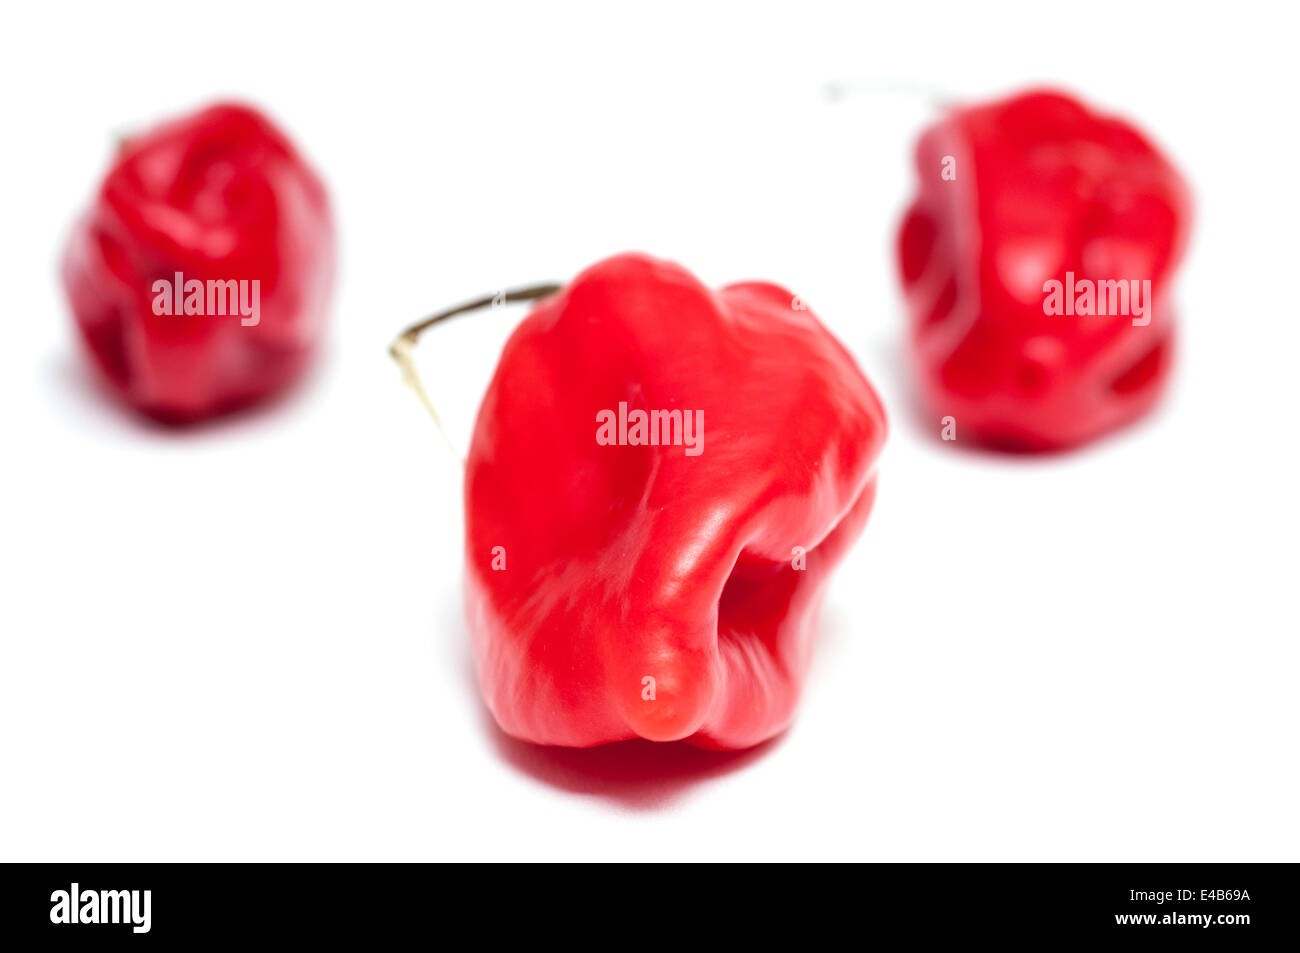 Three red hot habaneros chili peppers Stock Photo